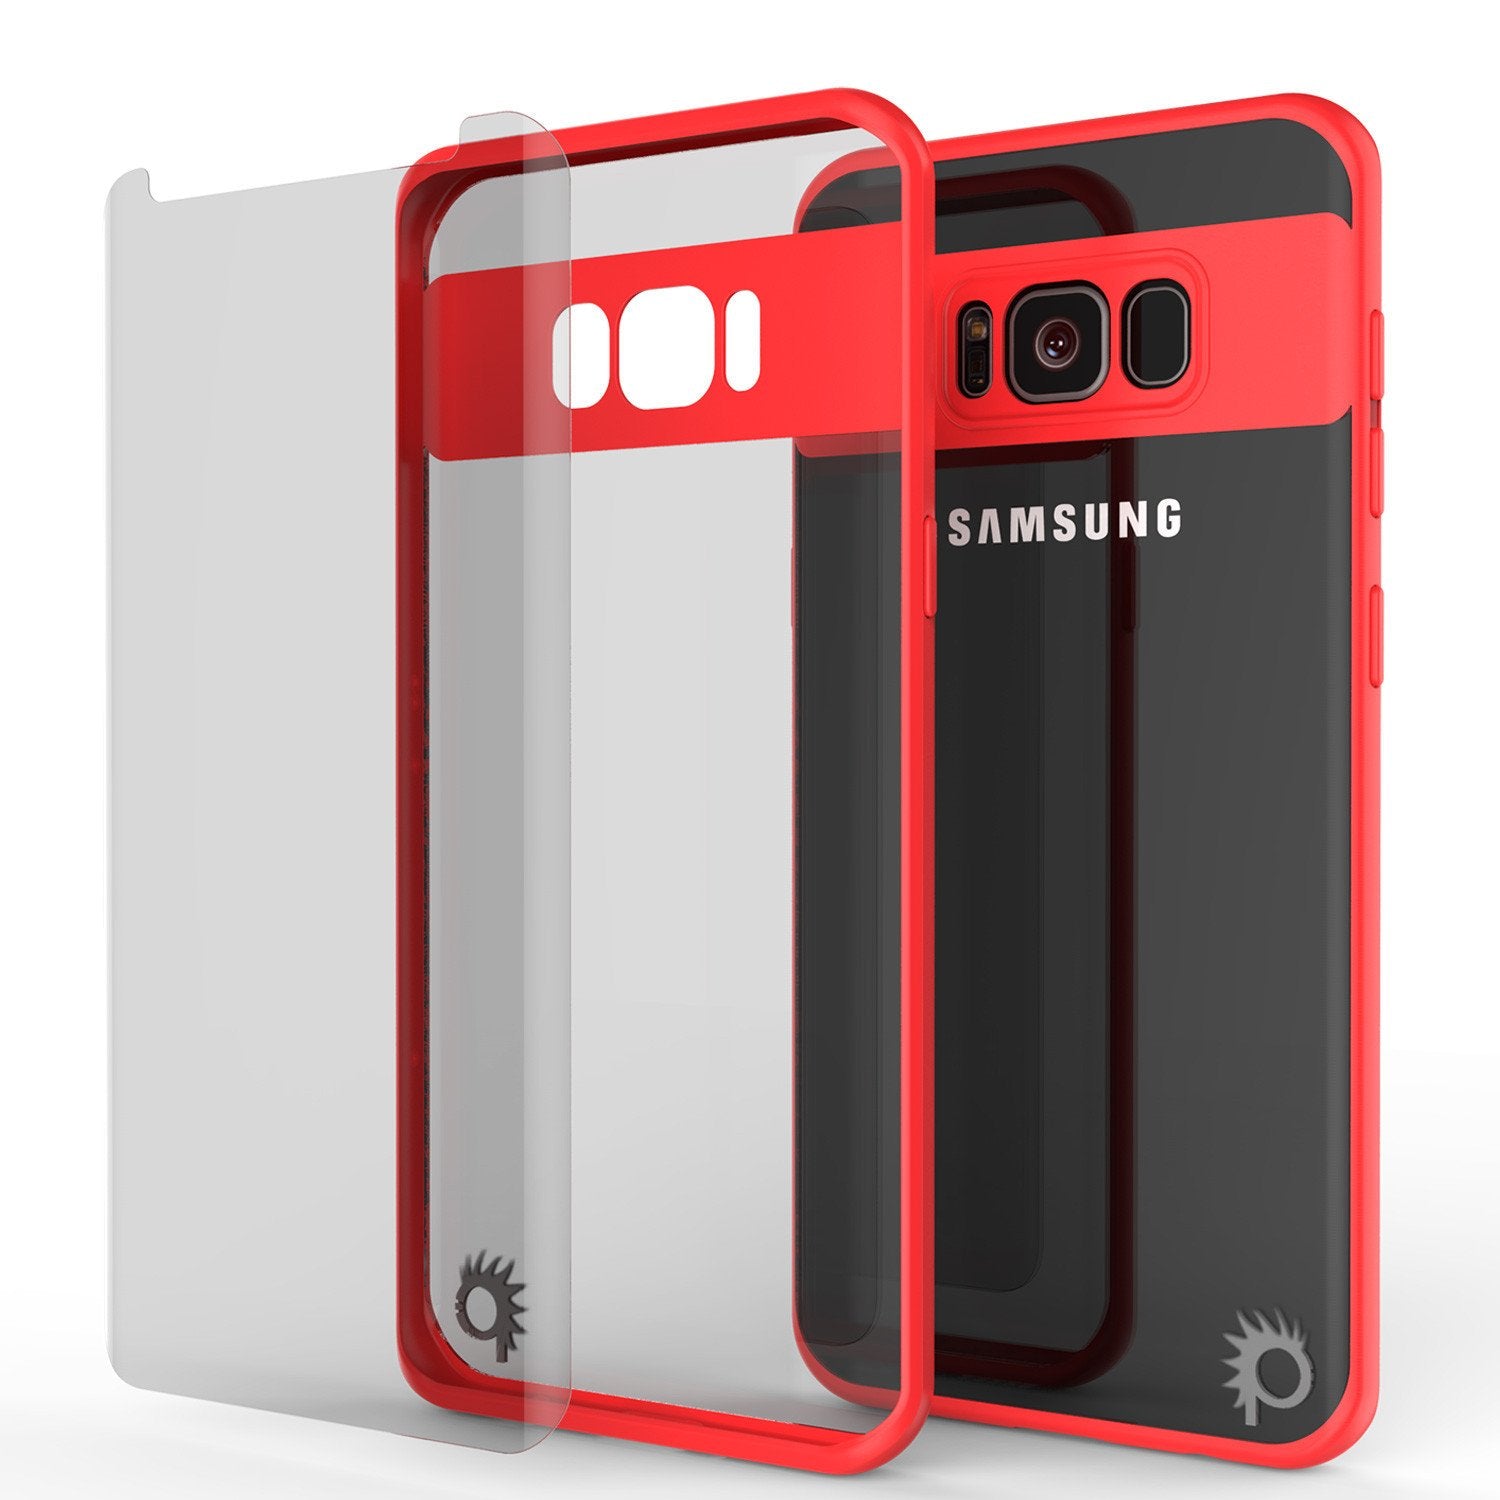 Galaxy S8 Plus Case, Punkcase [MASK Series] [RED] Full Body Hybrid Dual Layer TPU Cover W/ Protective PUNKSHIELD Screen Protector - PunkCase NZ